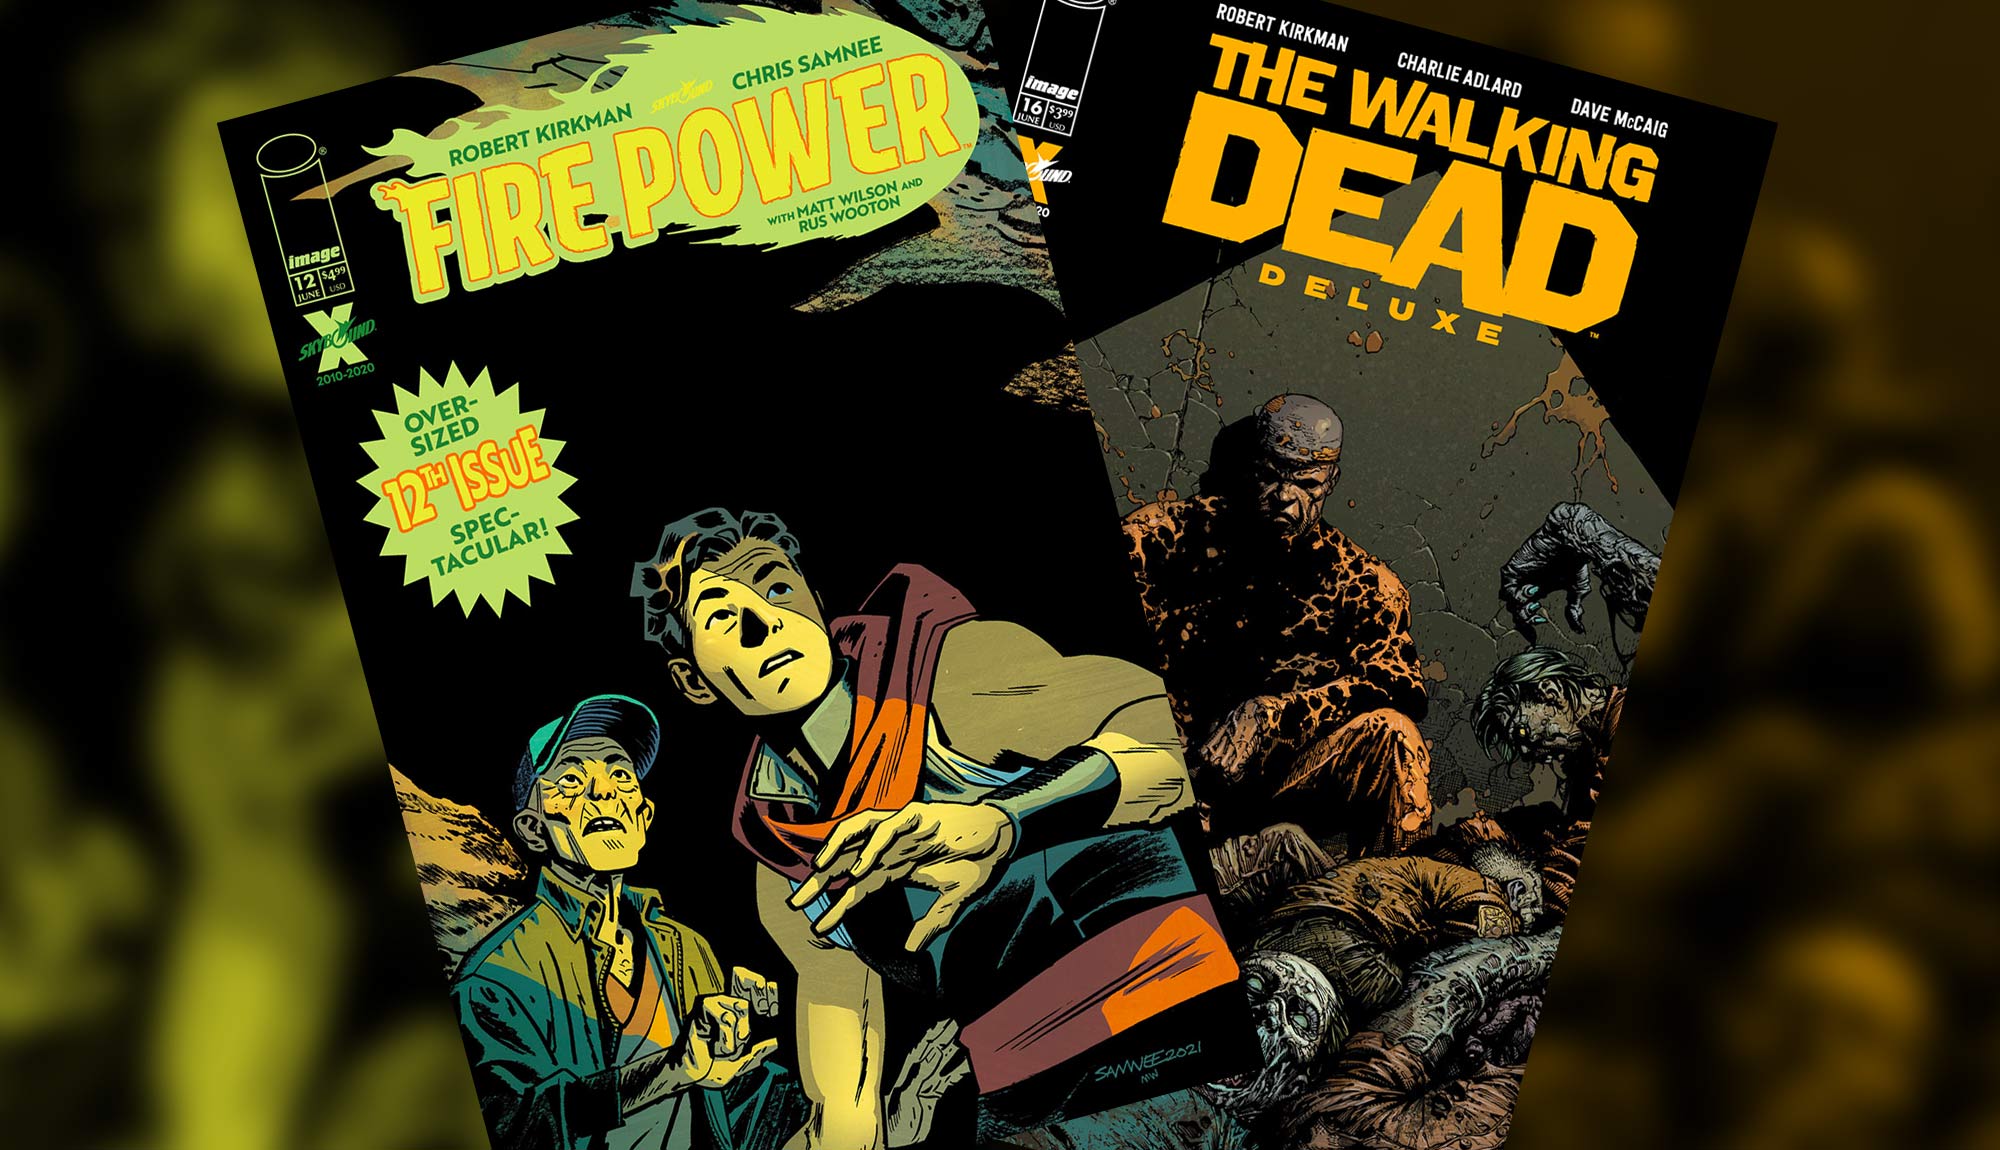 This Week’s Comics: FIRE POWER, THE WALKING DEAD DELUXE